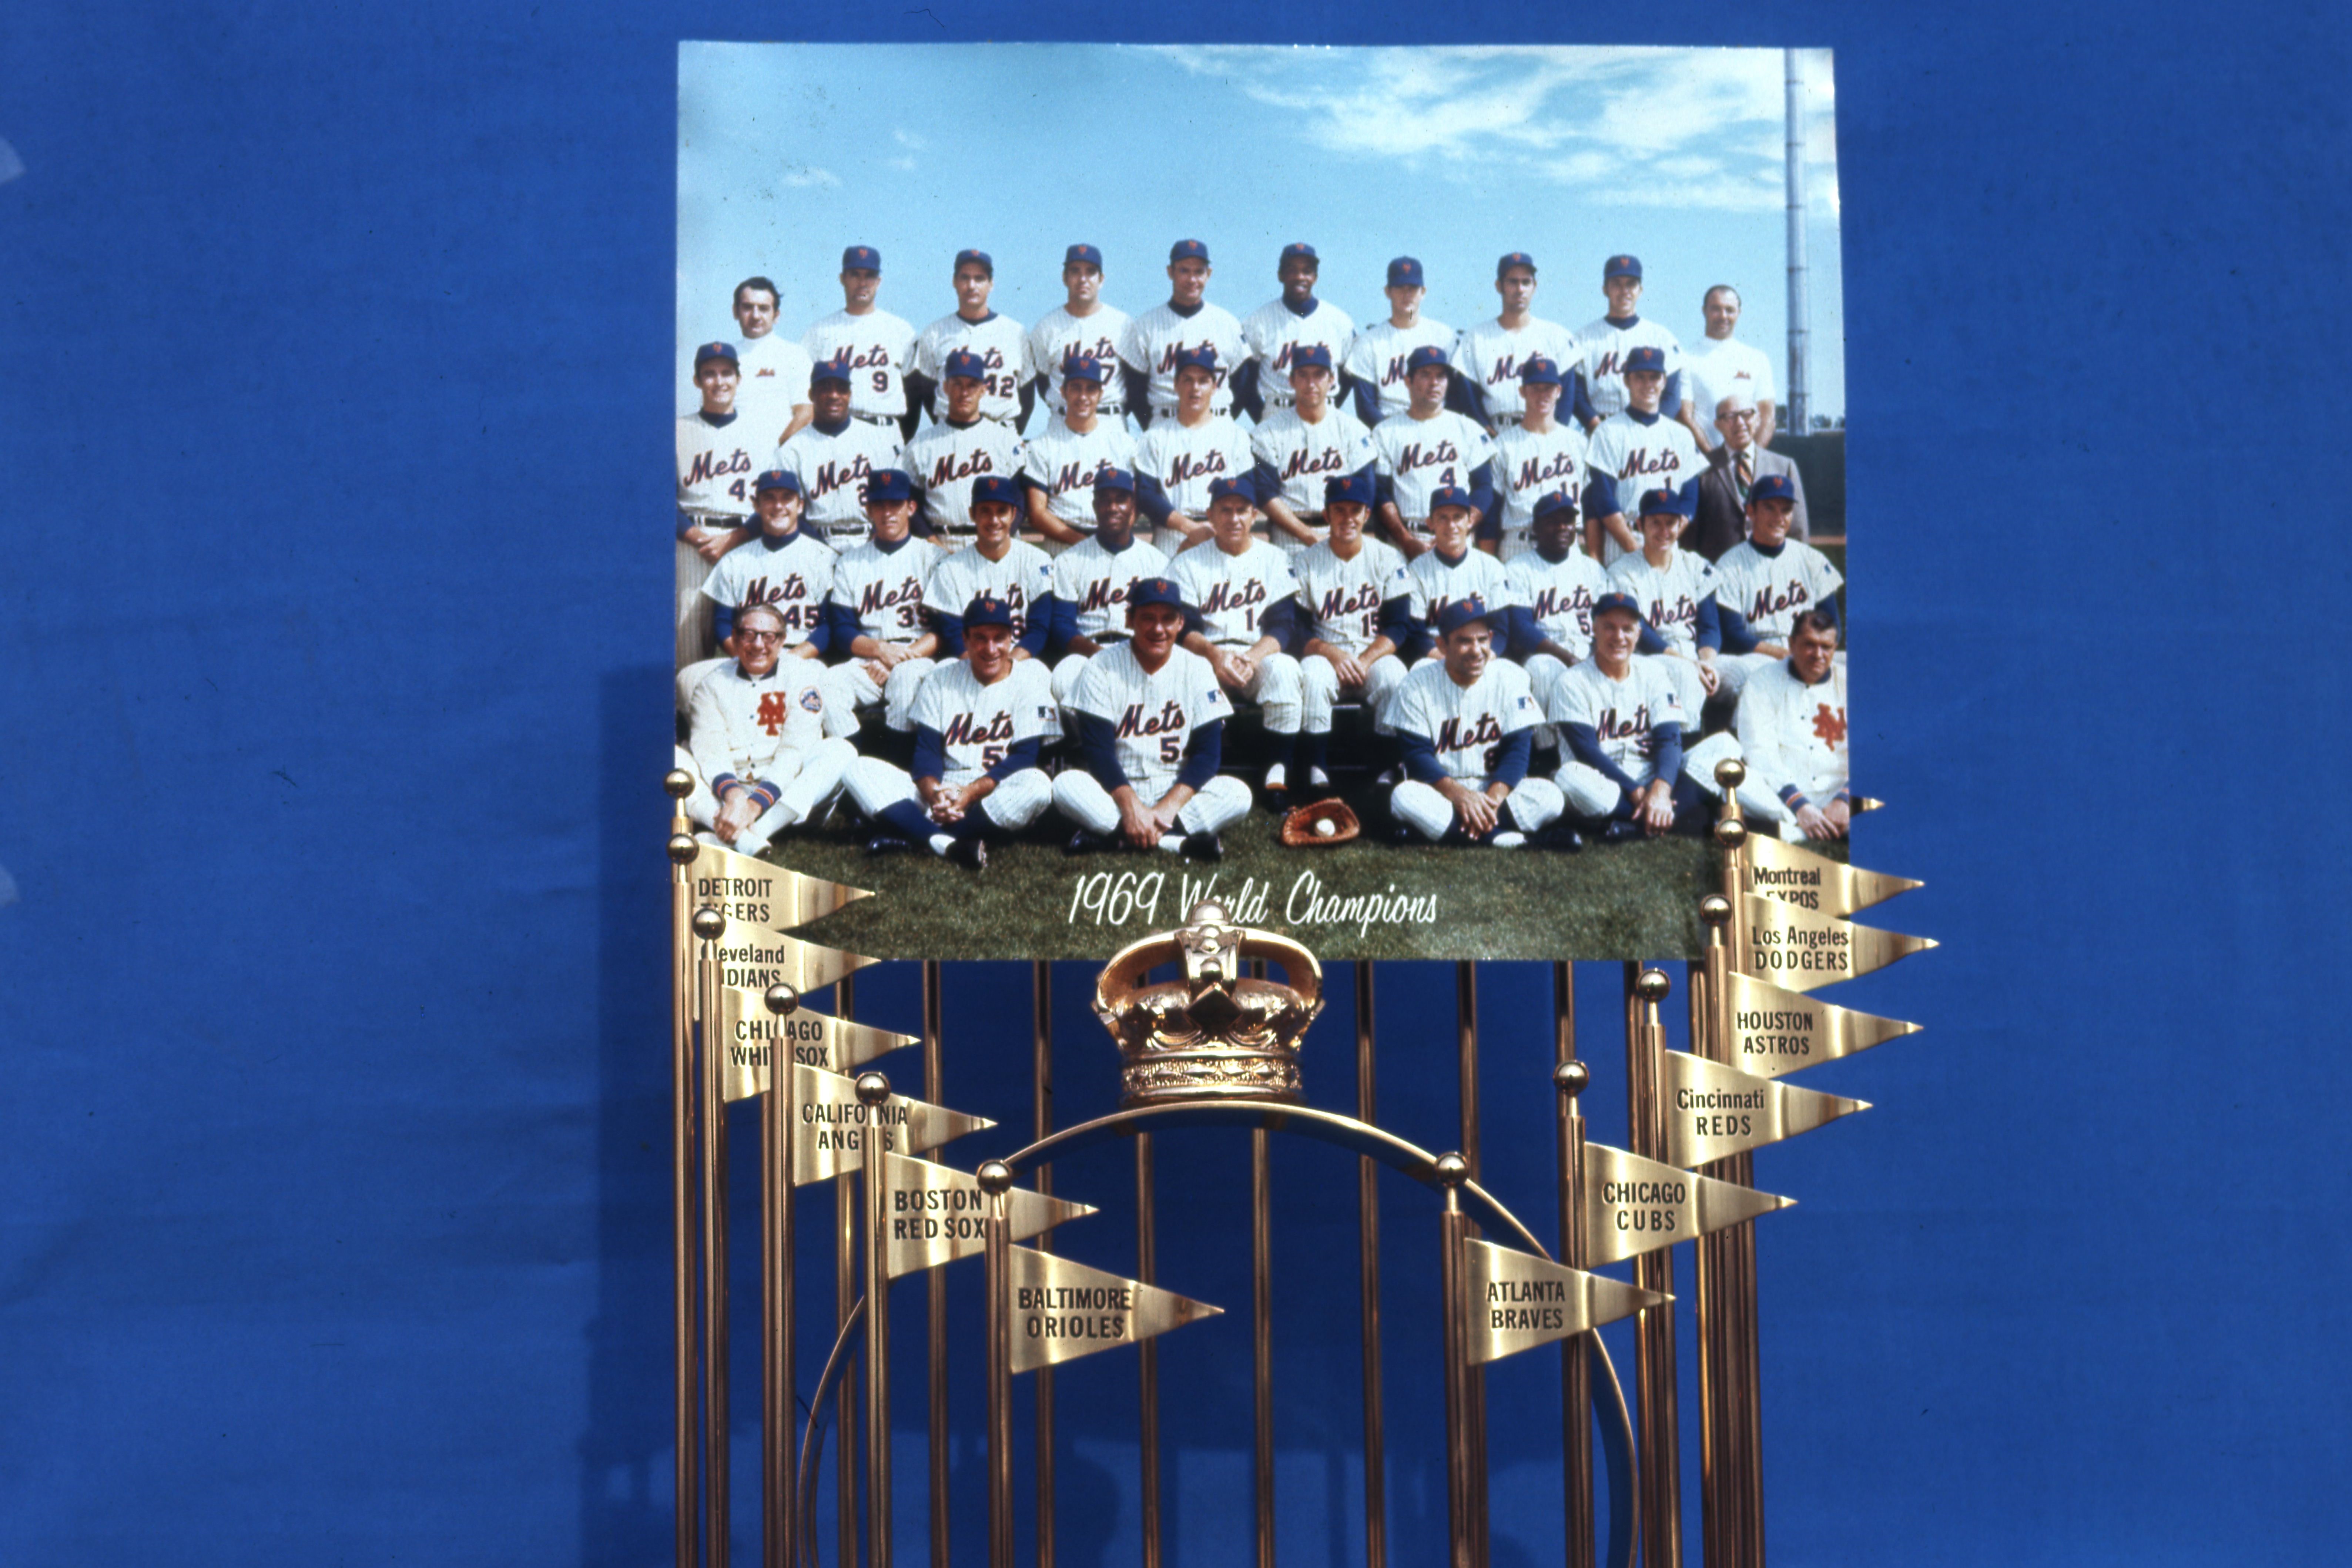 1969 Mets Team Photo and Commissioner's Trophy